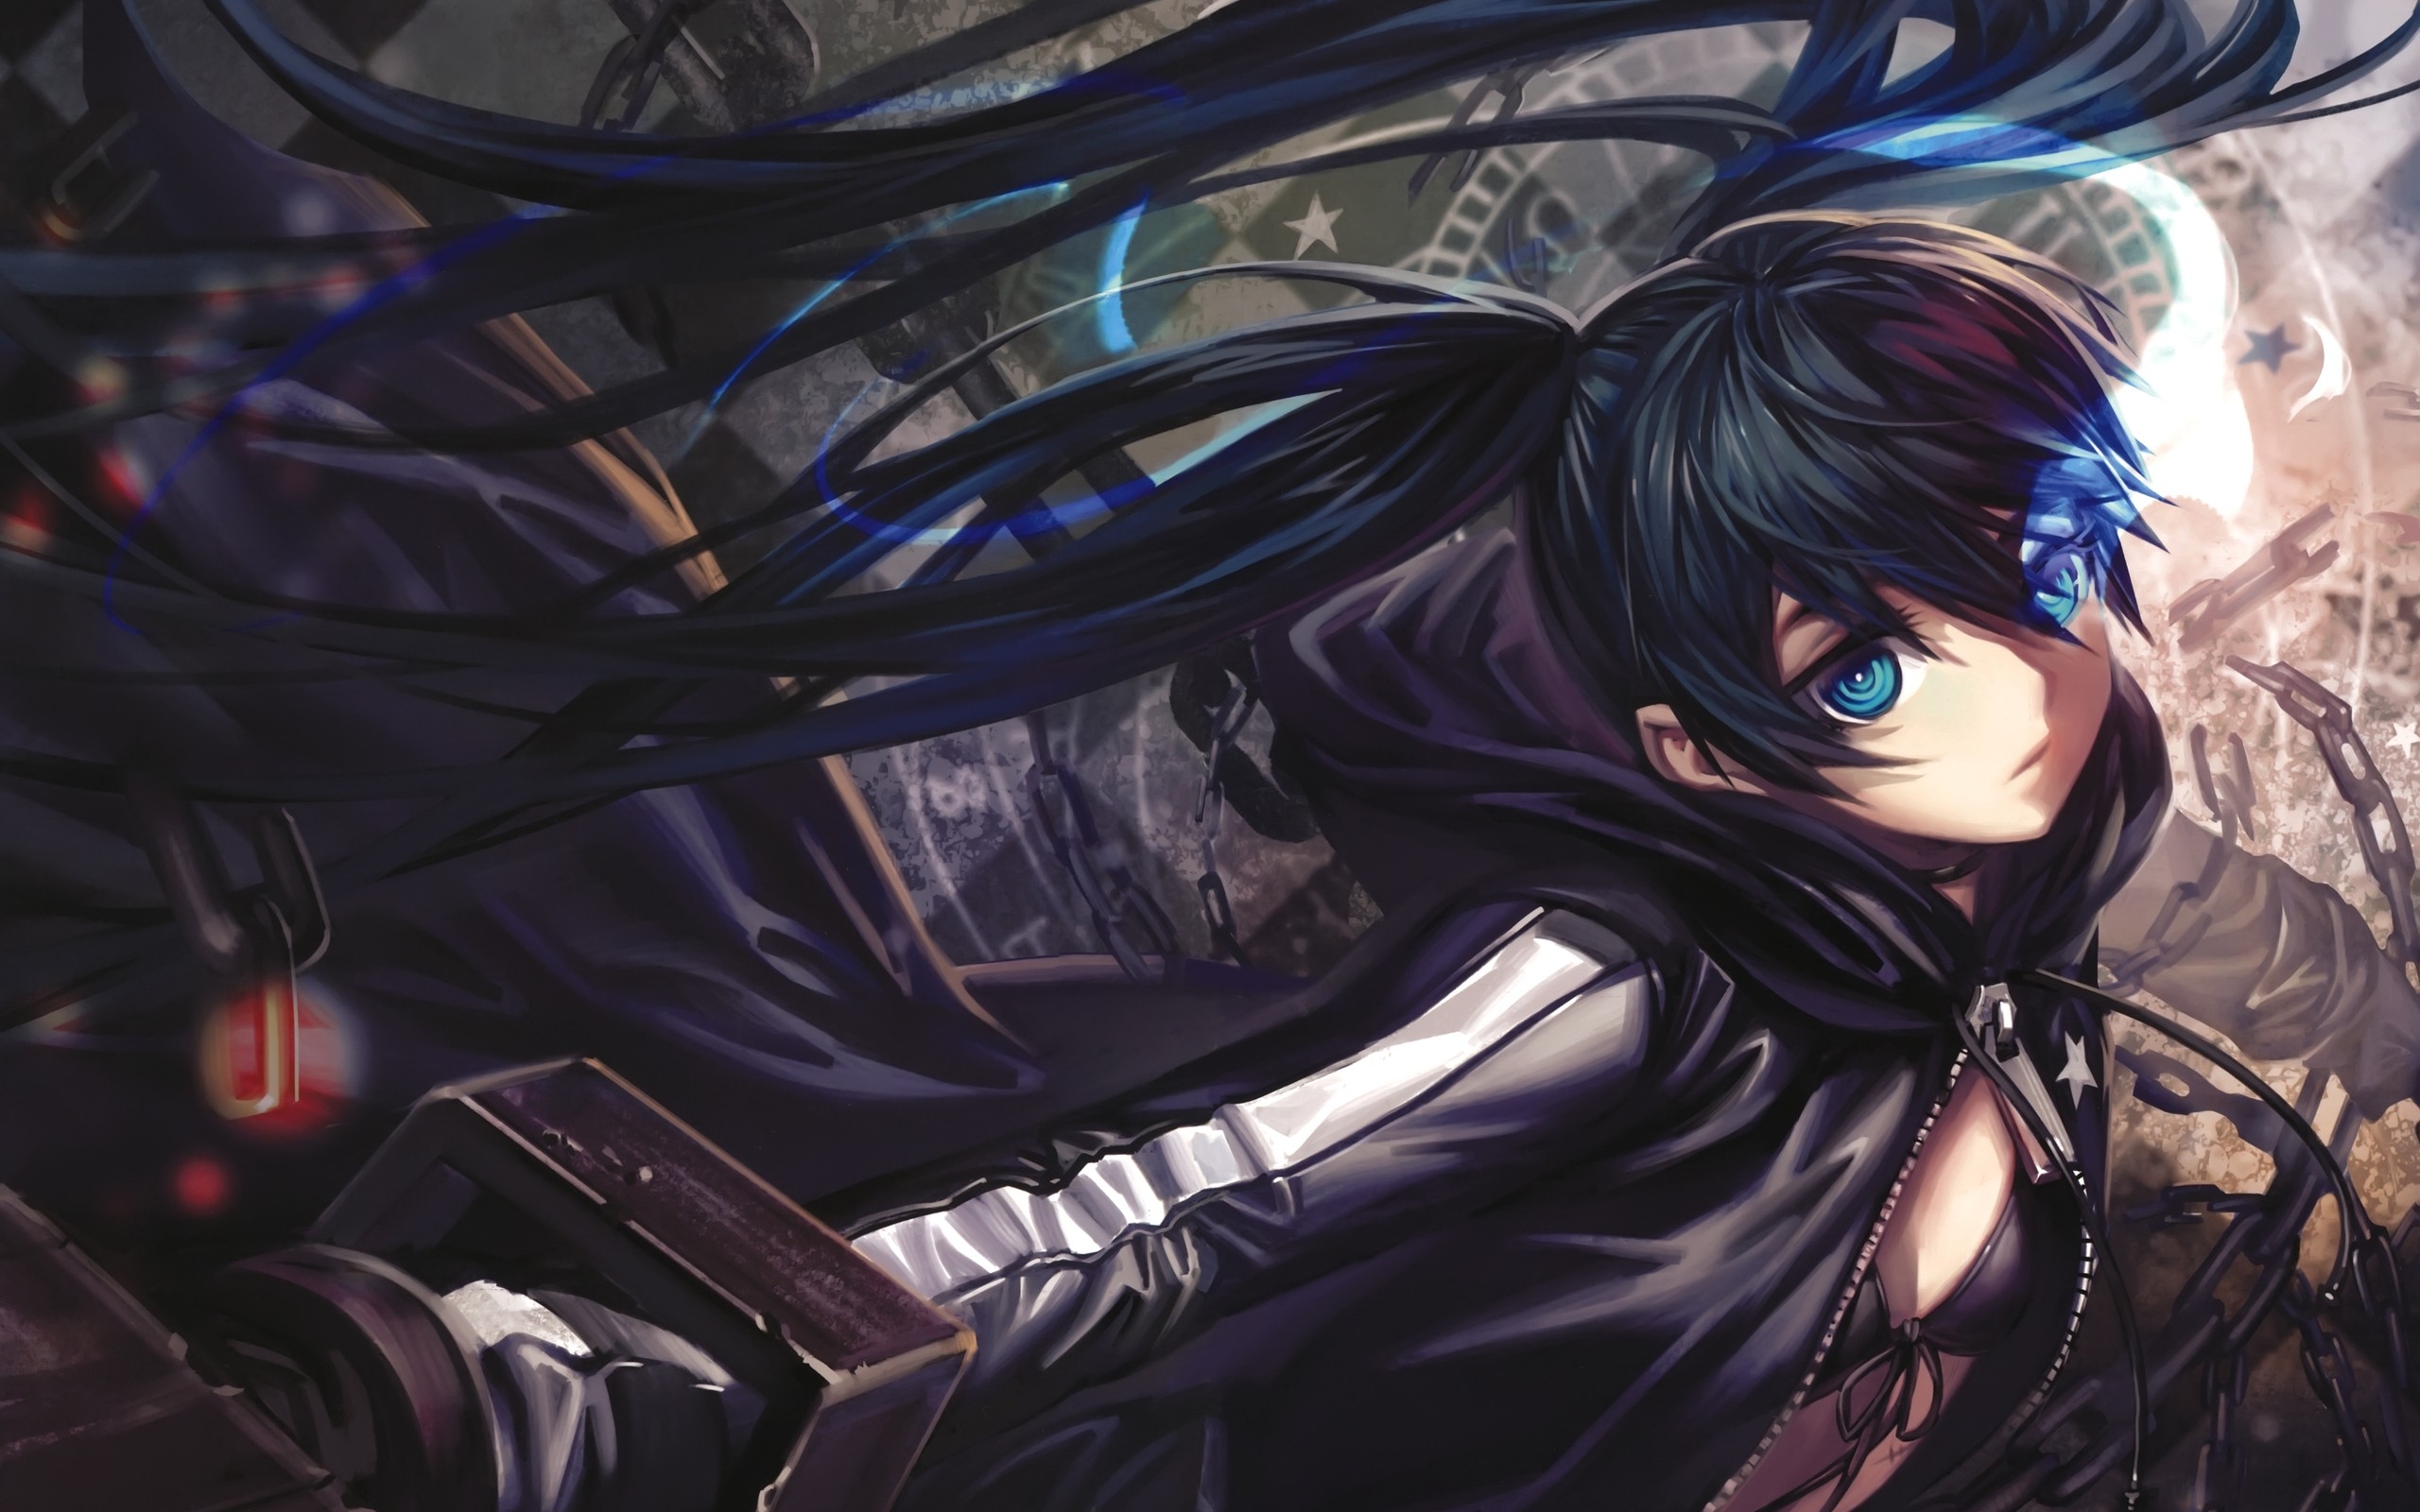 Download Wallpaper, Download black rock shooter blue eyes bra twintails anime chains anime girls glowing eyes 2560x1600 wallpa Wallpaper –Free Wallpaper Download